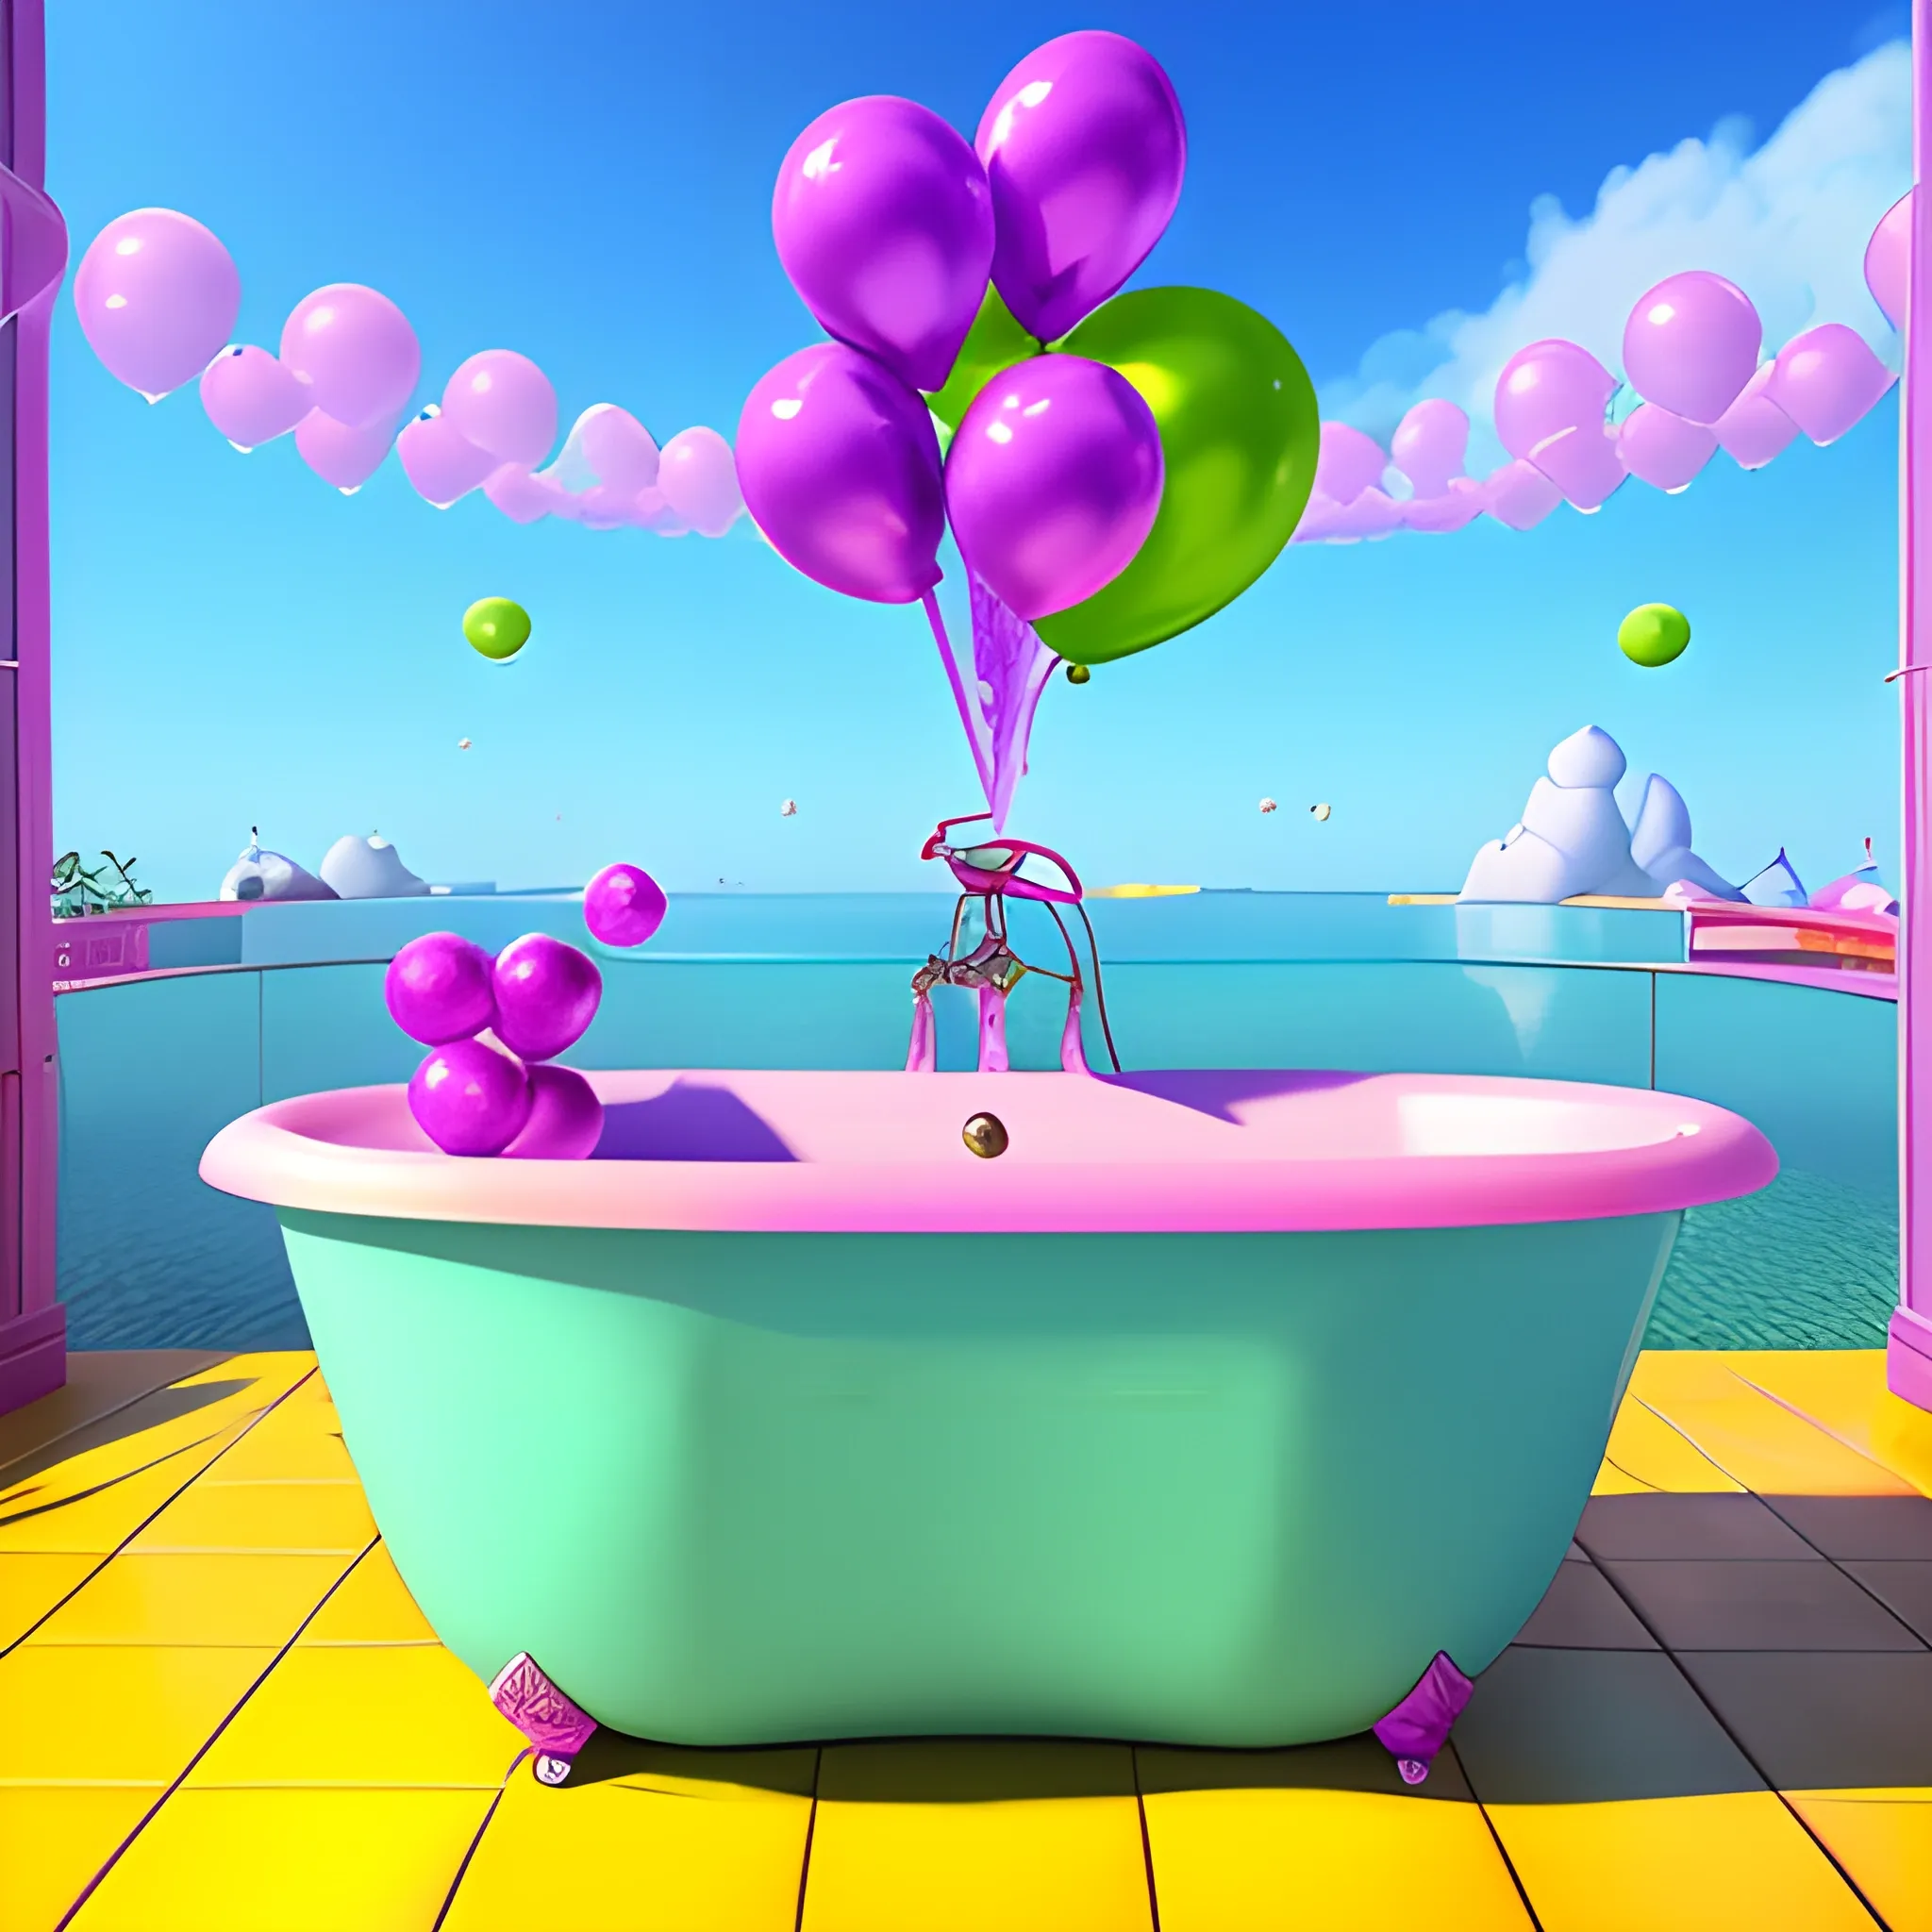 A banana looks like a little girl is relaxing into a bathtub, pink purple light blue and green bubbles, colorful balloons in the air, whimsical details, saturated colors, 3d Zbrush, CGI unreal engine, Cartoon,